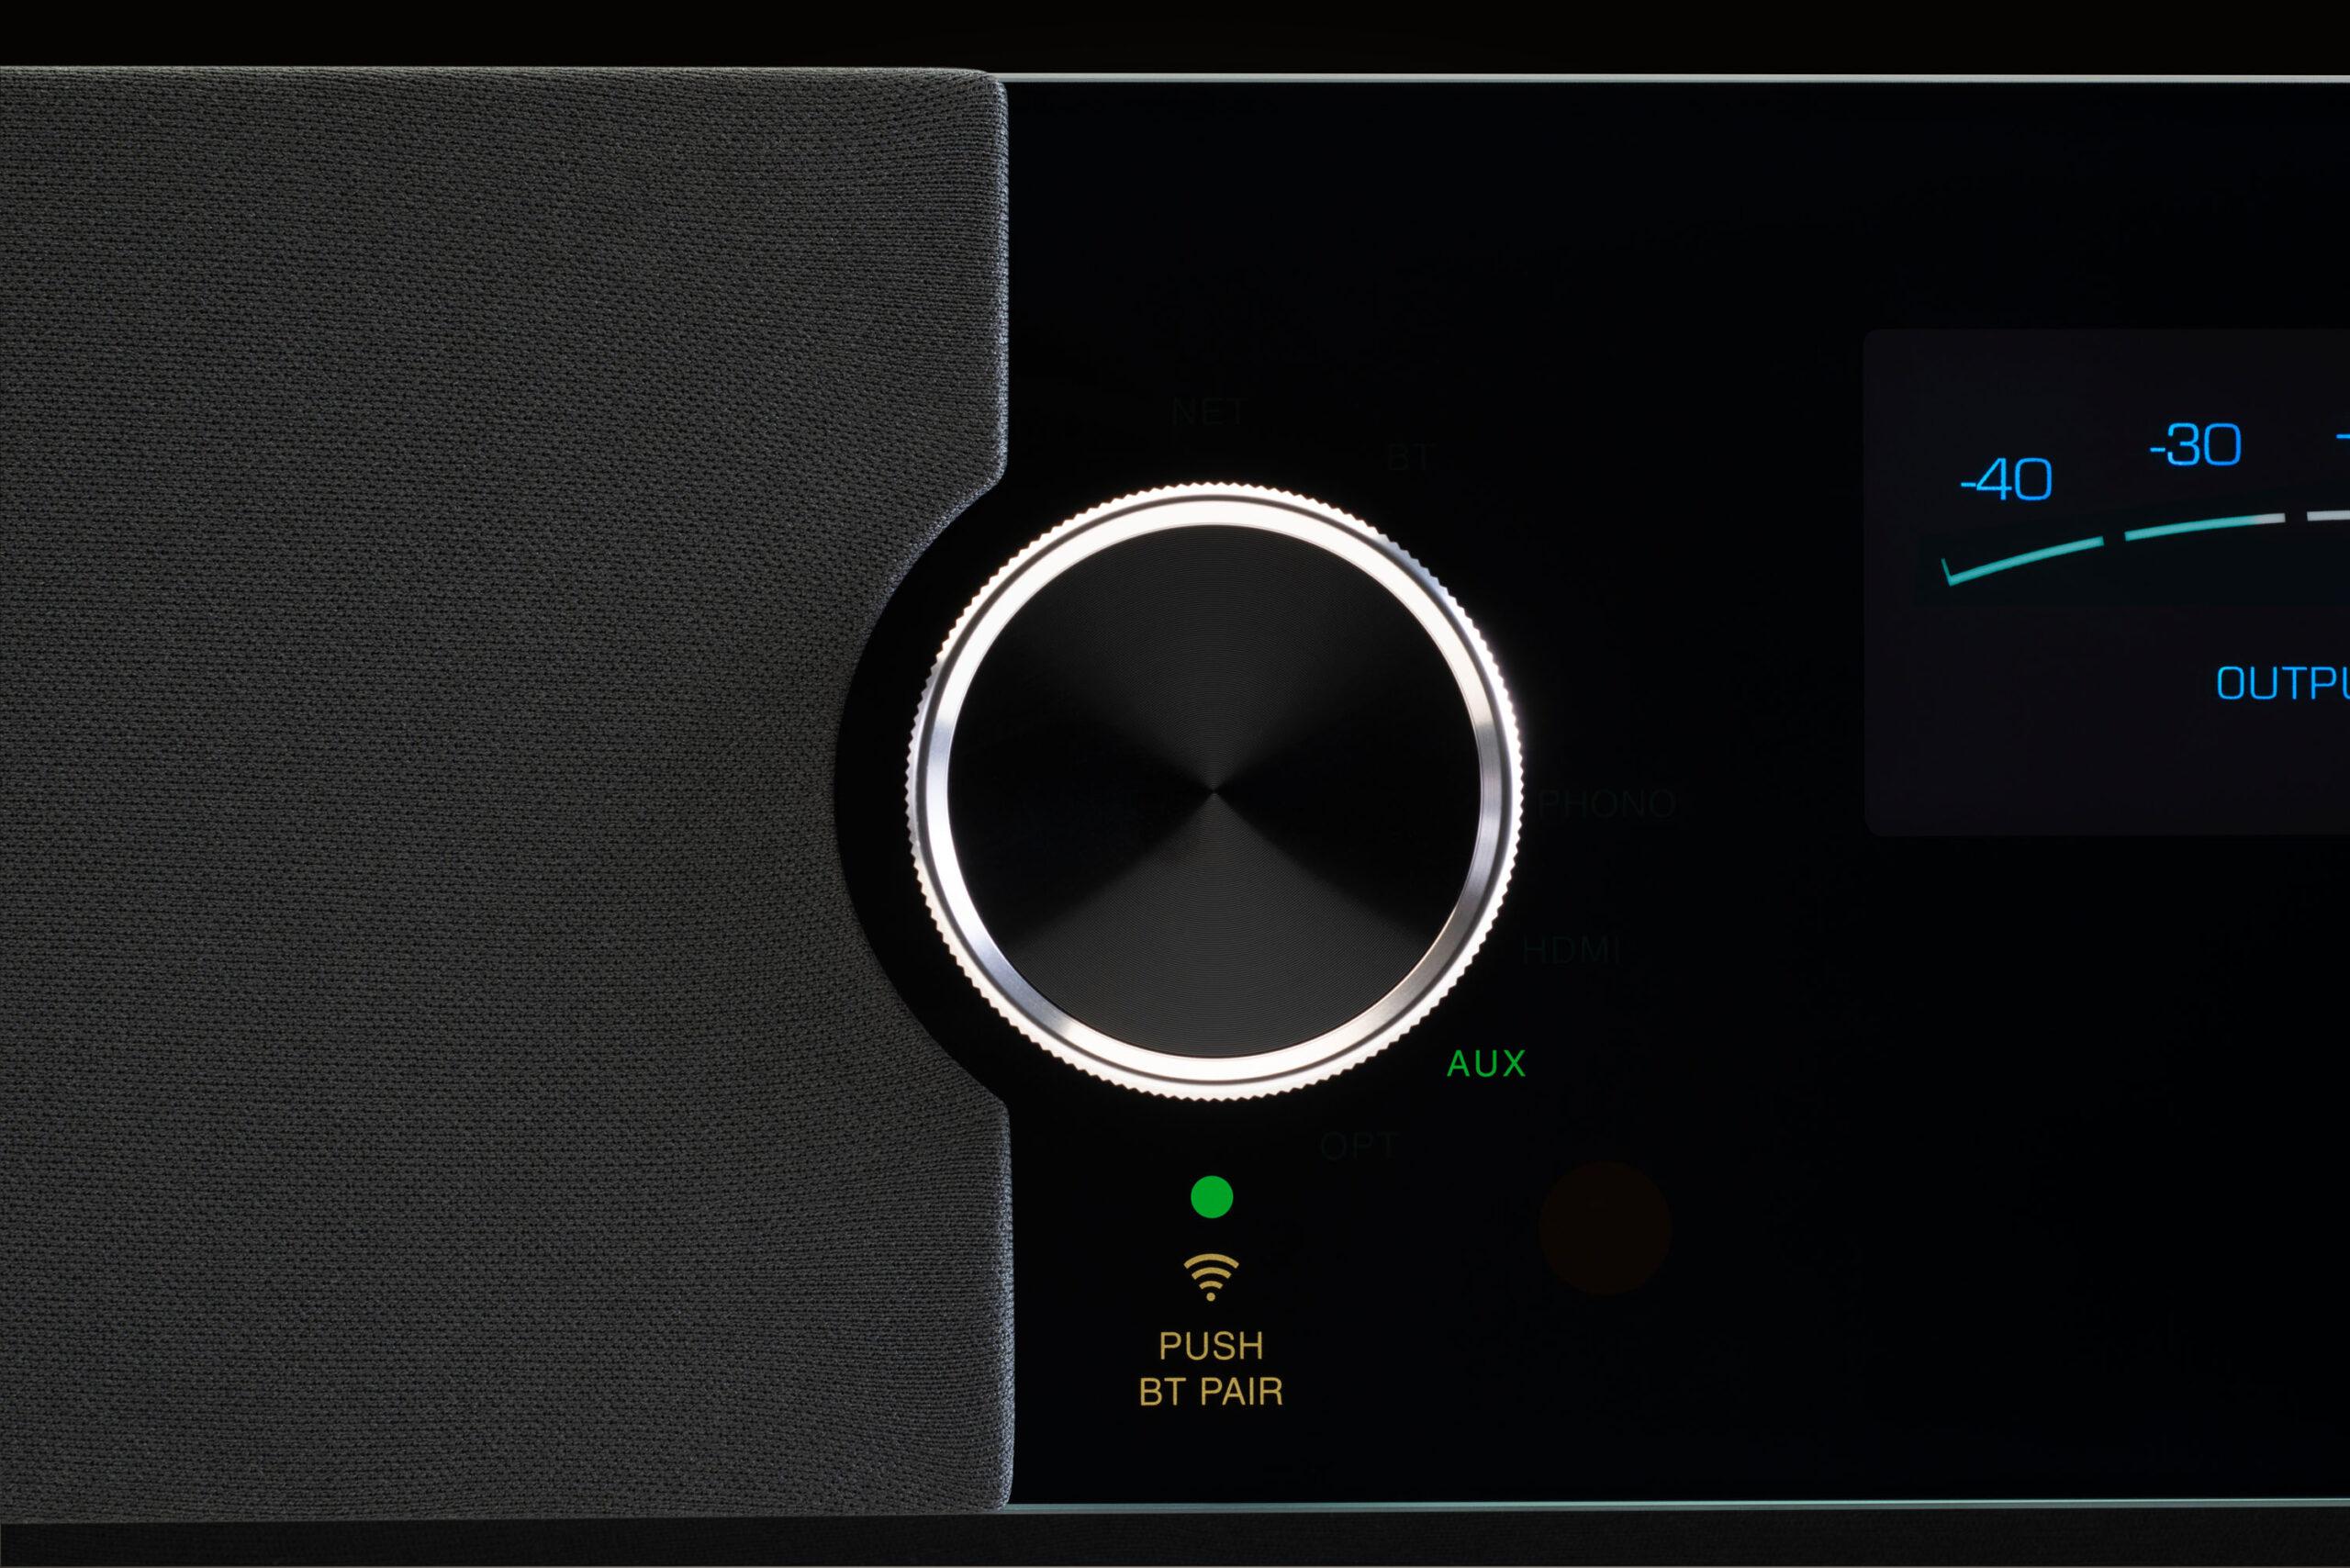 Two wireless speakers, the RS150 and RS250, offer streaming convenience with unmistakable McIntosh style, quality & performance. McIntosh c43c432f rs250 input aux hi res scaled